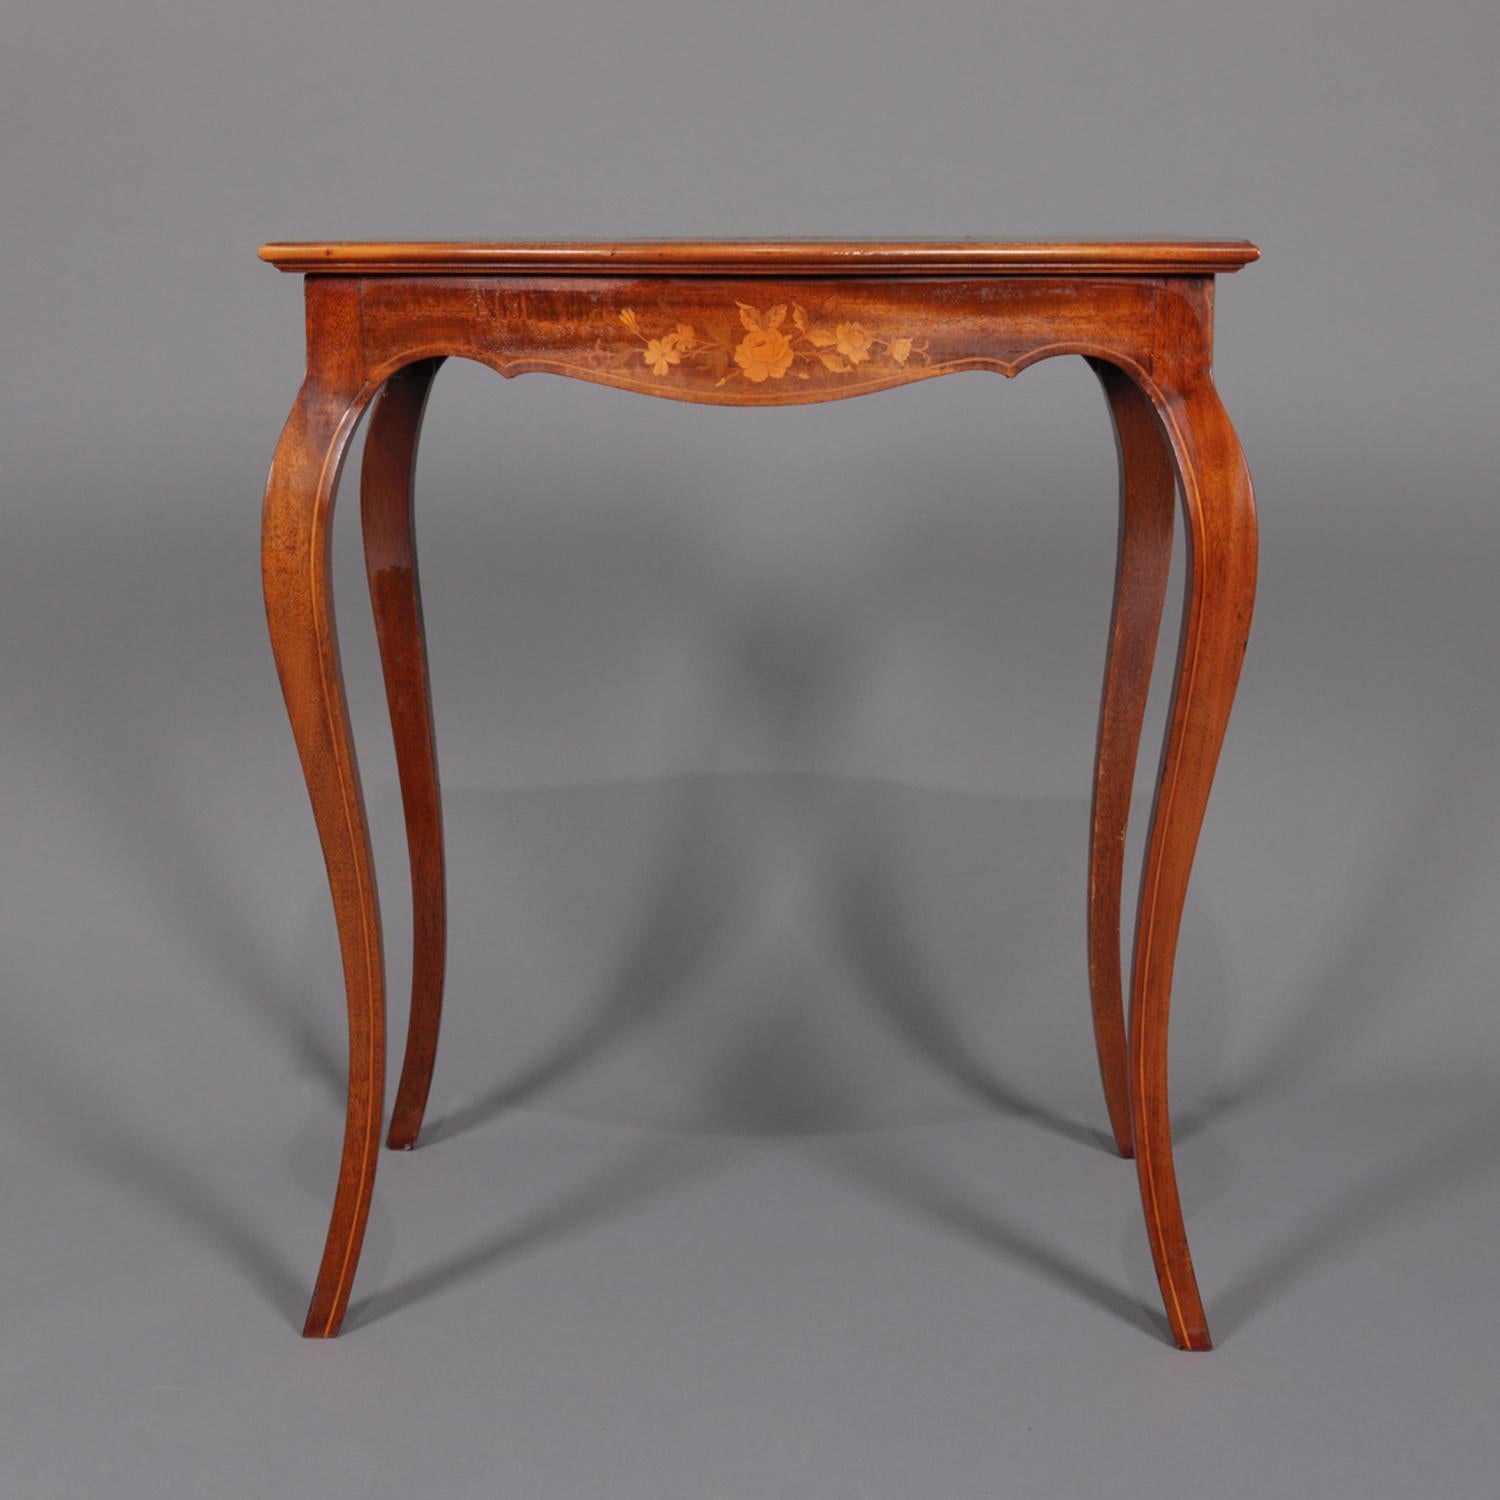 An antique French marquetry lamp table features mahogany construction with shaped top having central inlaid floral bouquet surmounting floral and foliate inlaid scalloped skirt and raised on cabriole legs, satinwood banding throughout, circa